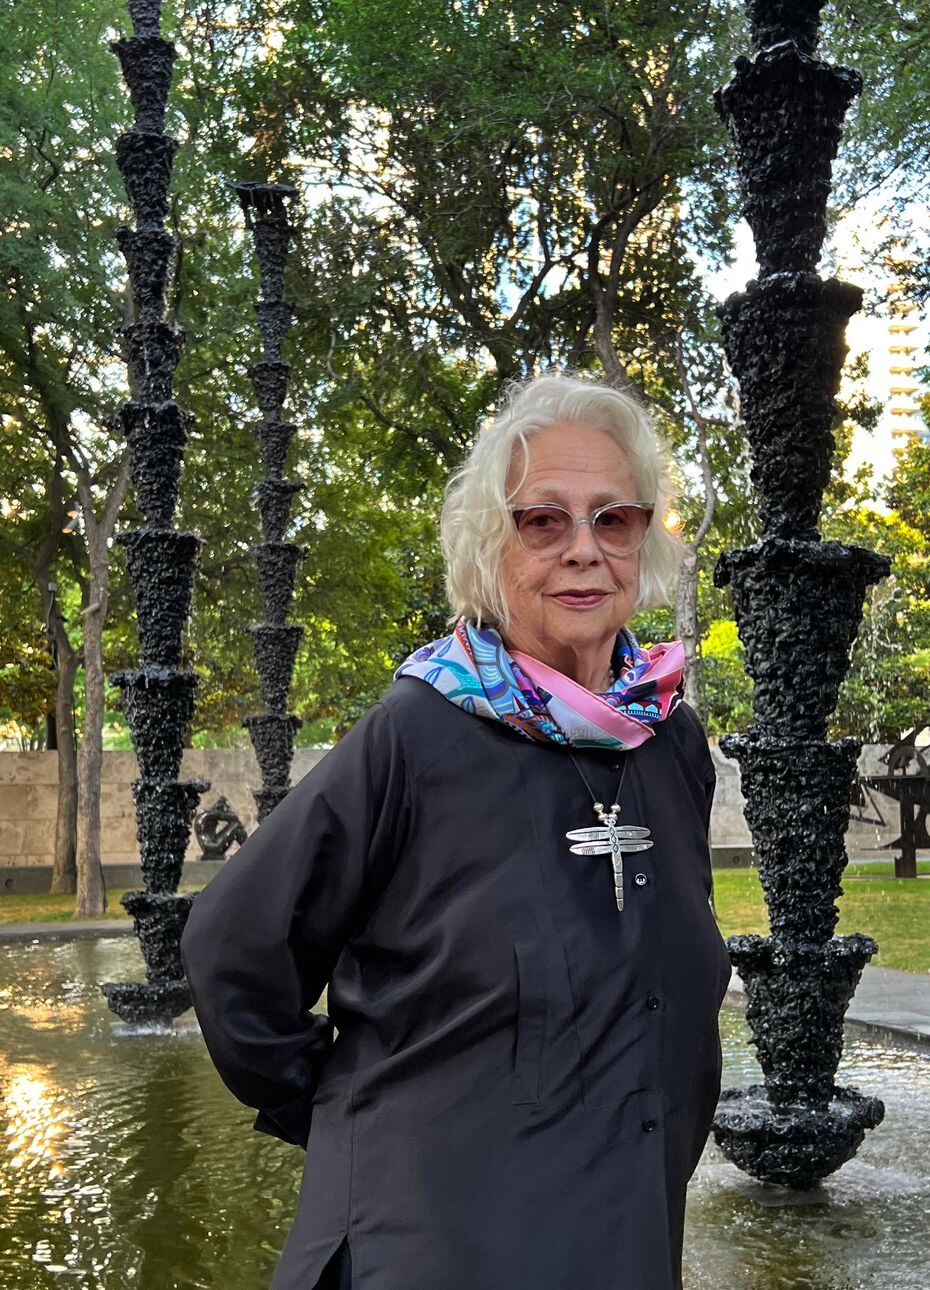 Artist Lynda Benglis brought her tall fountains, dubbed "Bounty," "Amber Waves" and "Fruited...